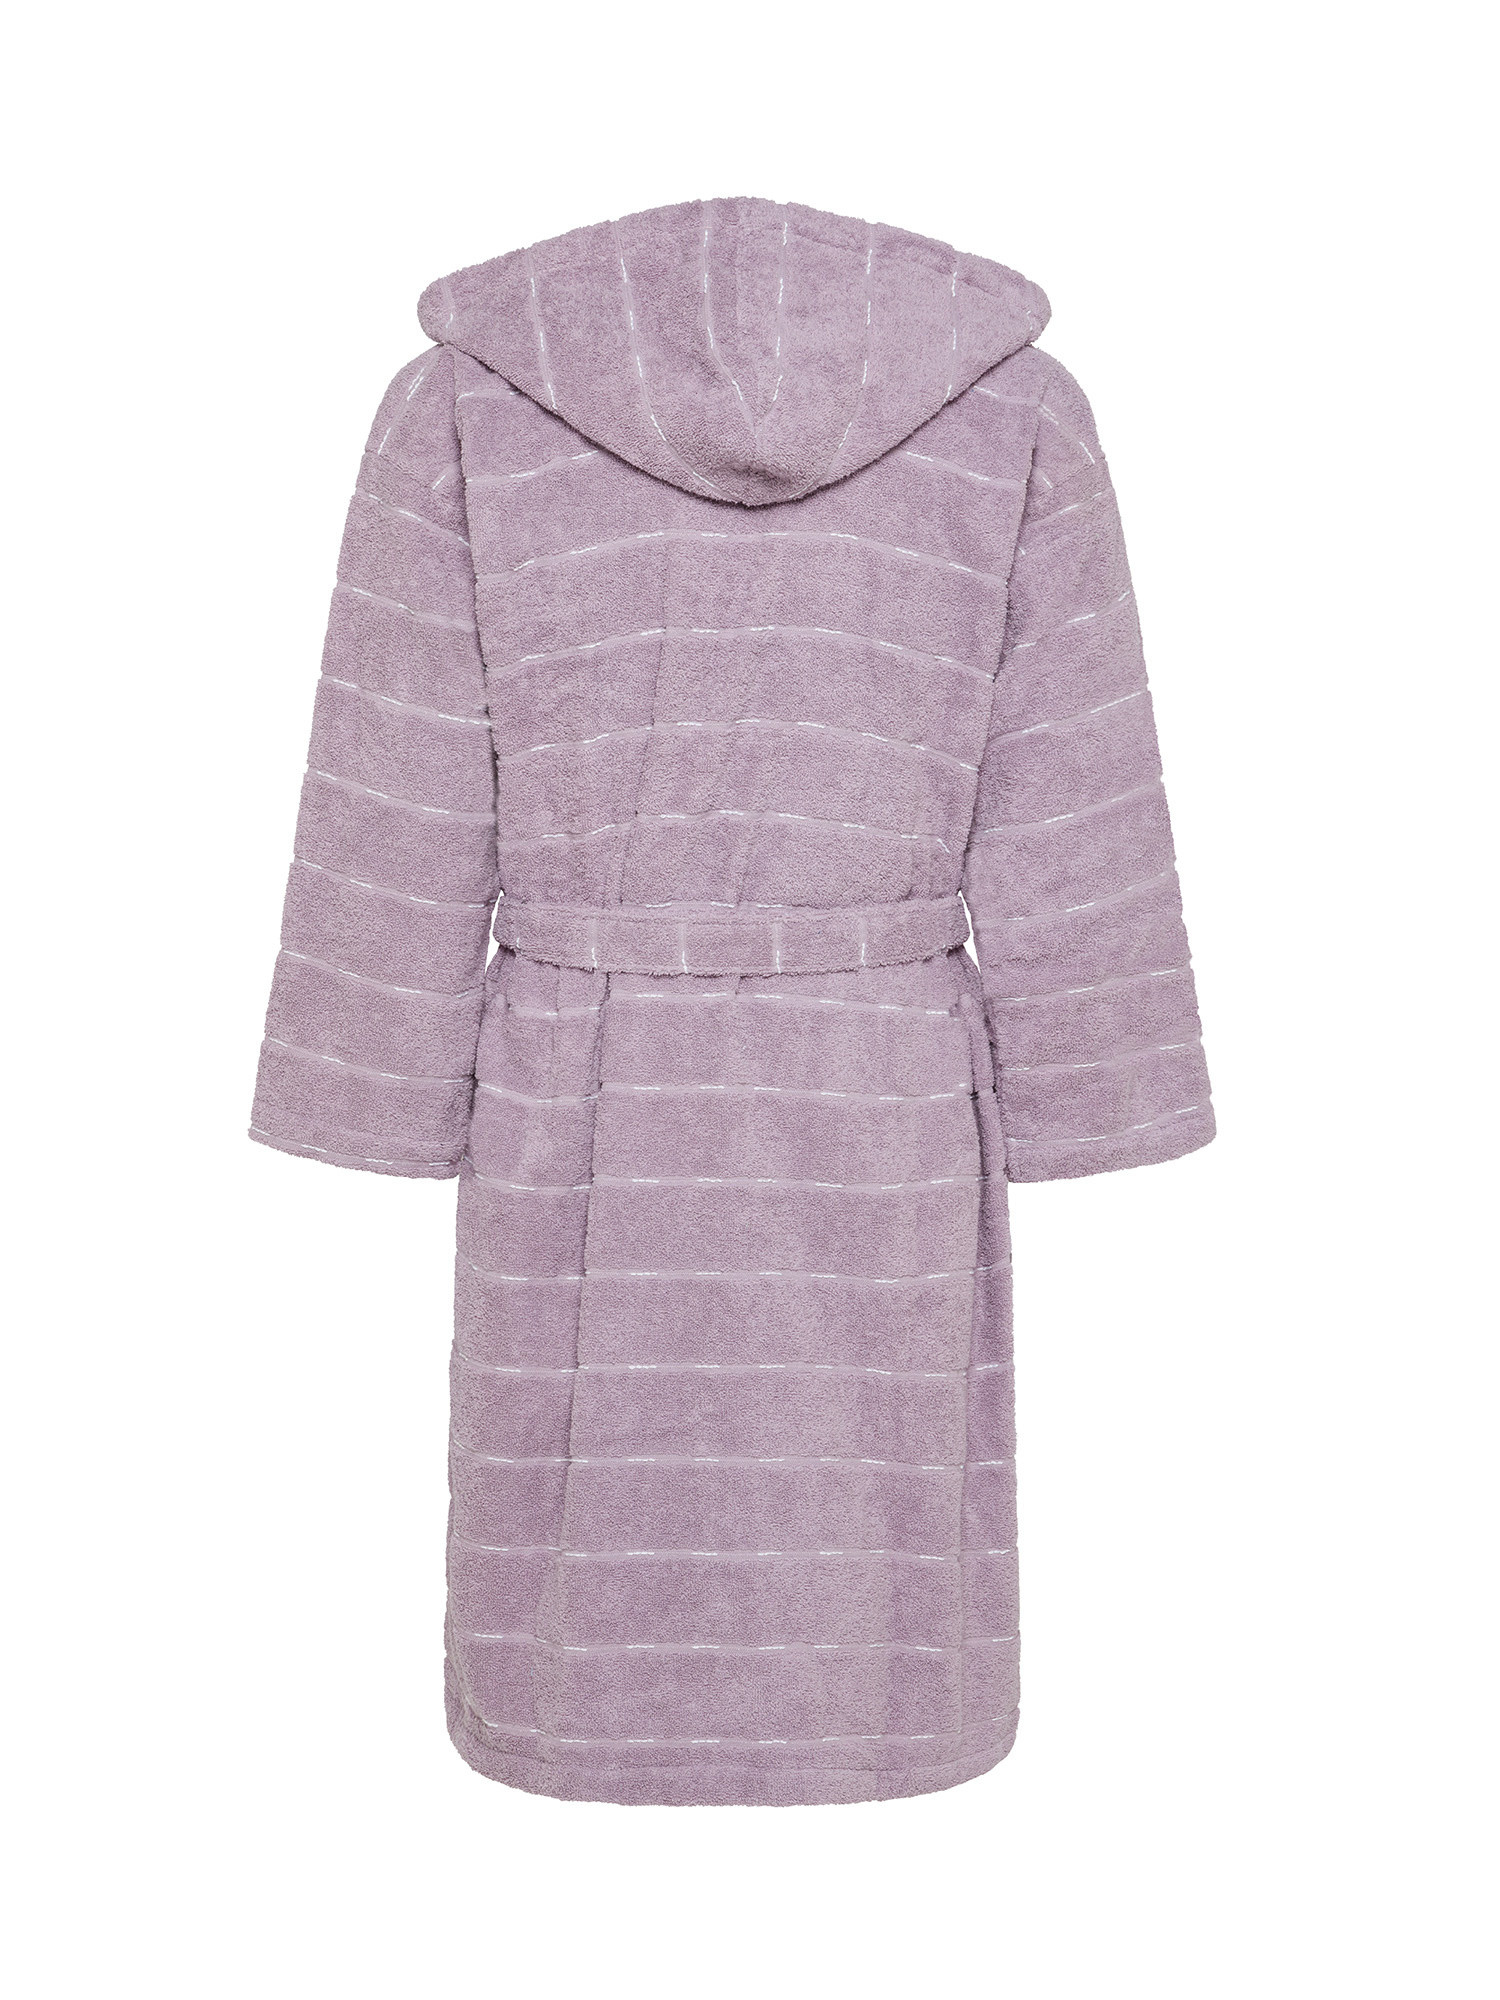 Yarn-dyed pure cotton bathrobe with stitching effect, Pink, large image number 1